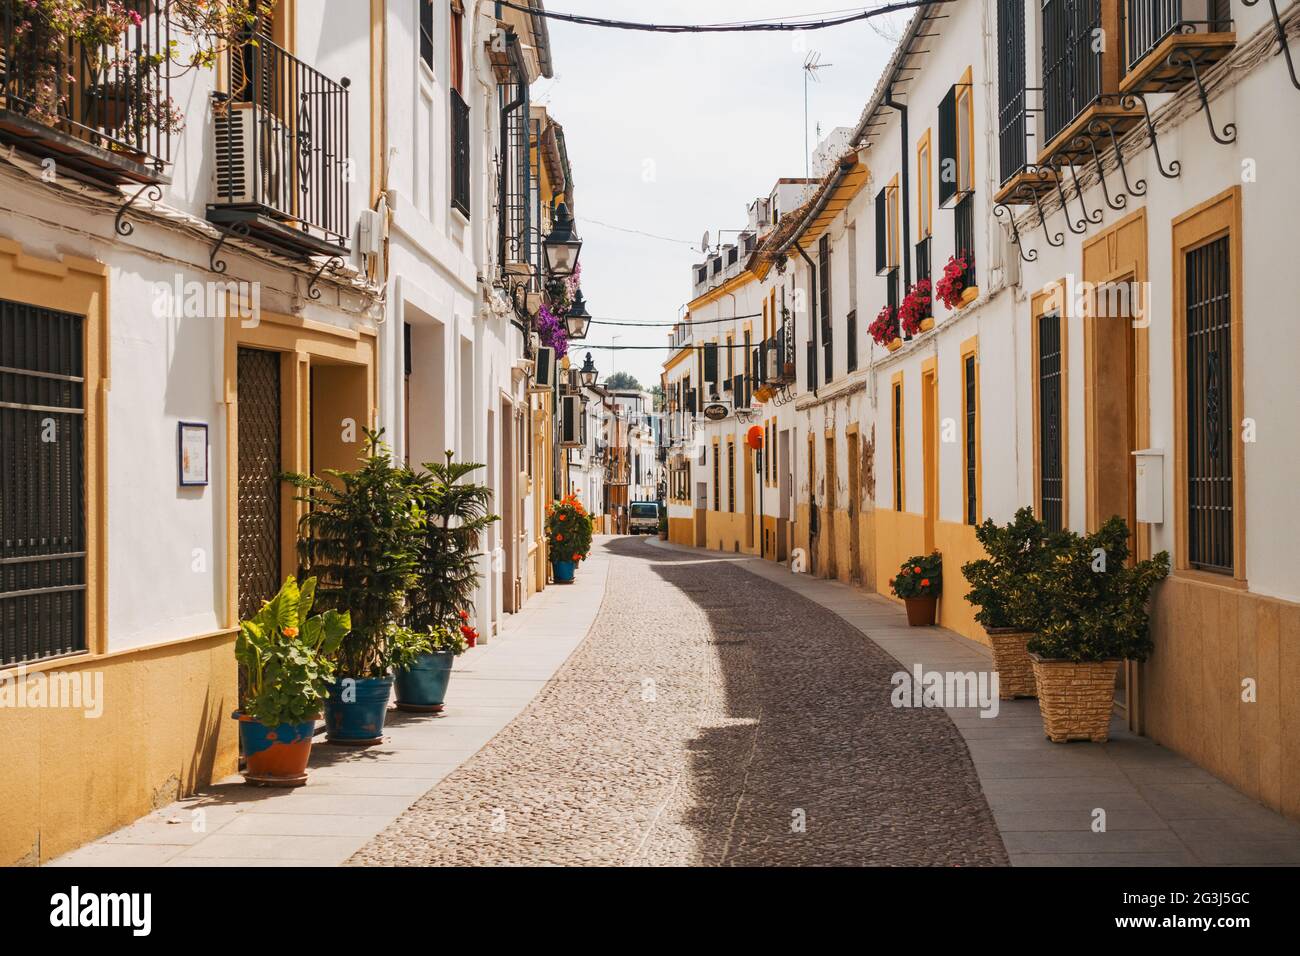 An ornate old residential street in the historic center of Córdoba, Spain, featuring yellow and white decoration and metalwork, dotted with pot plants Stock Photo